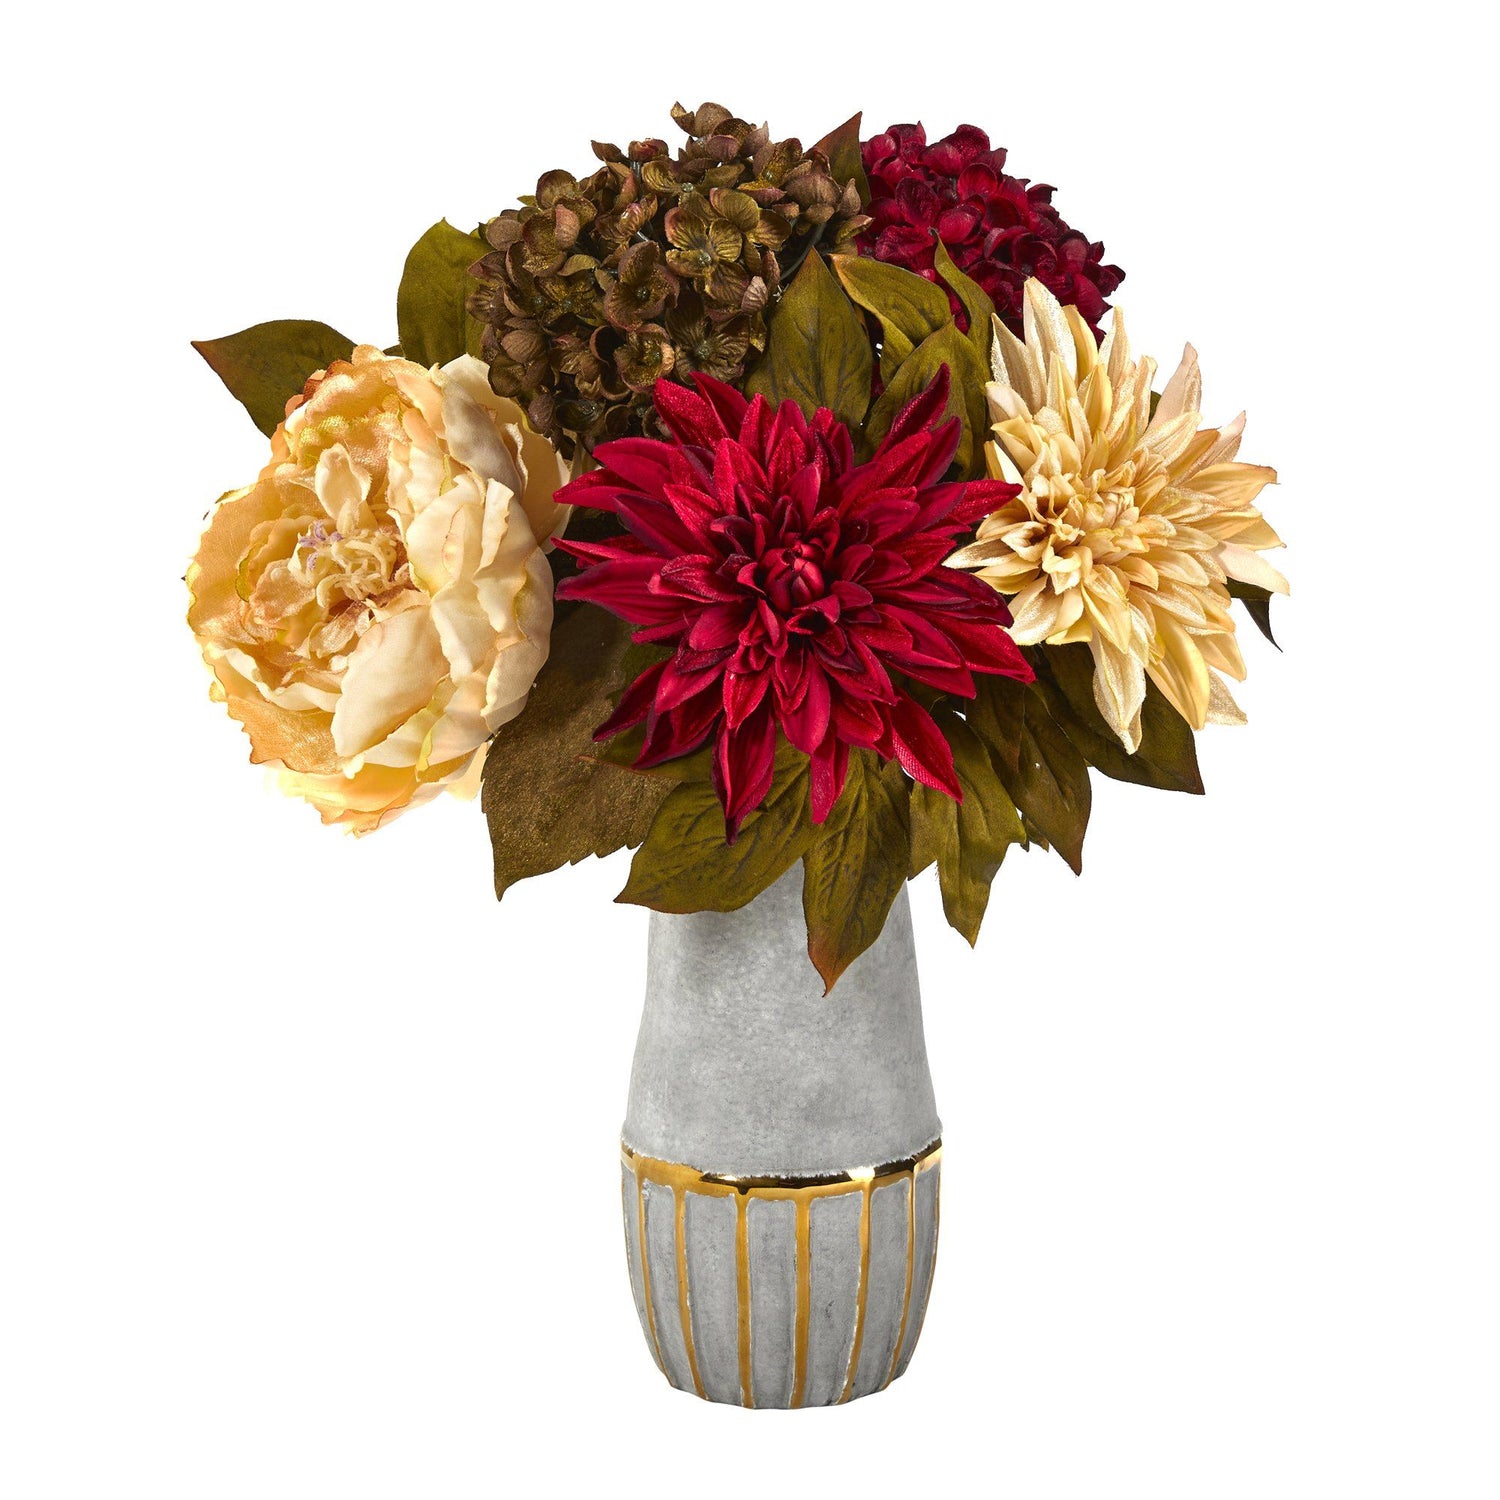 17” Peony, Hydrangea and Dahlia Artificial Arrangement in Stoneware Vase with Gold Trimming